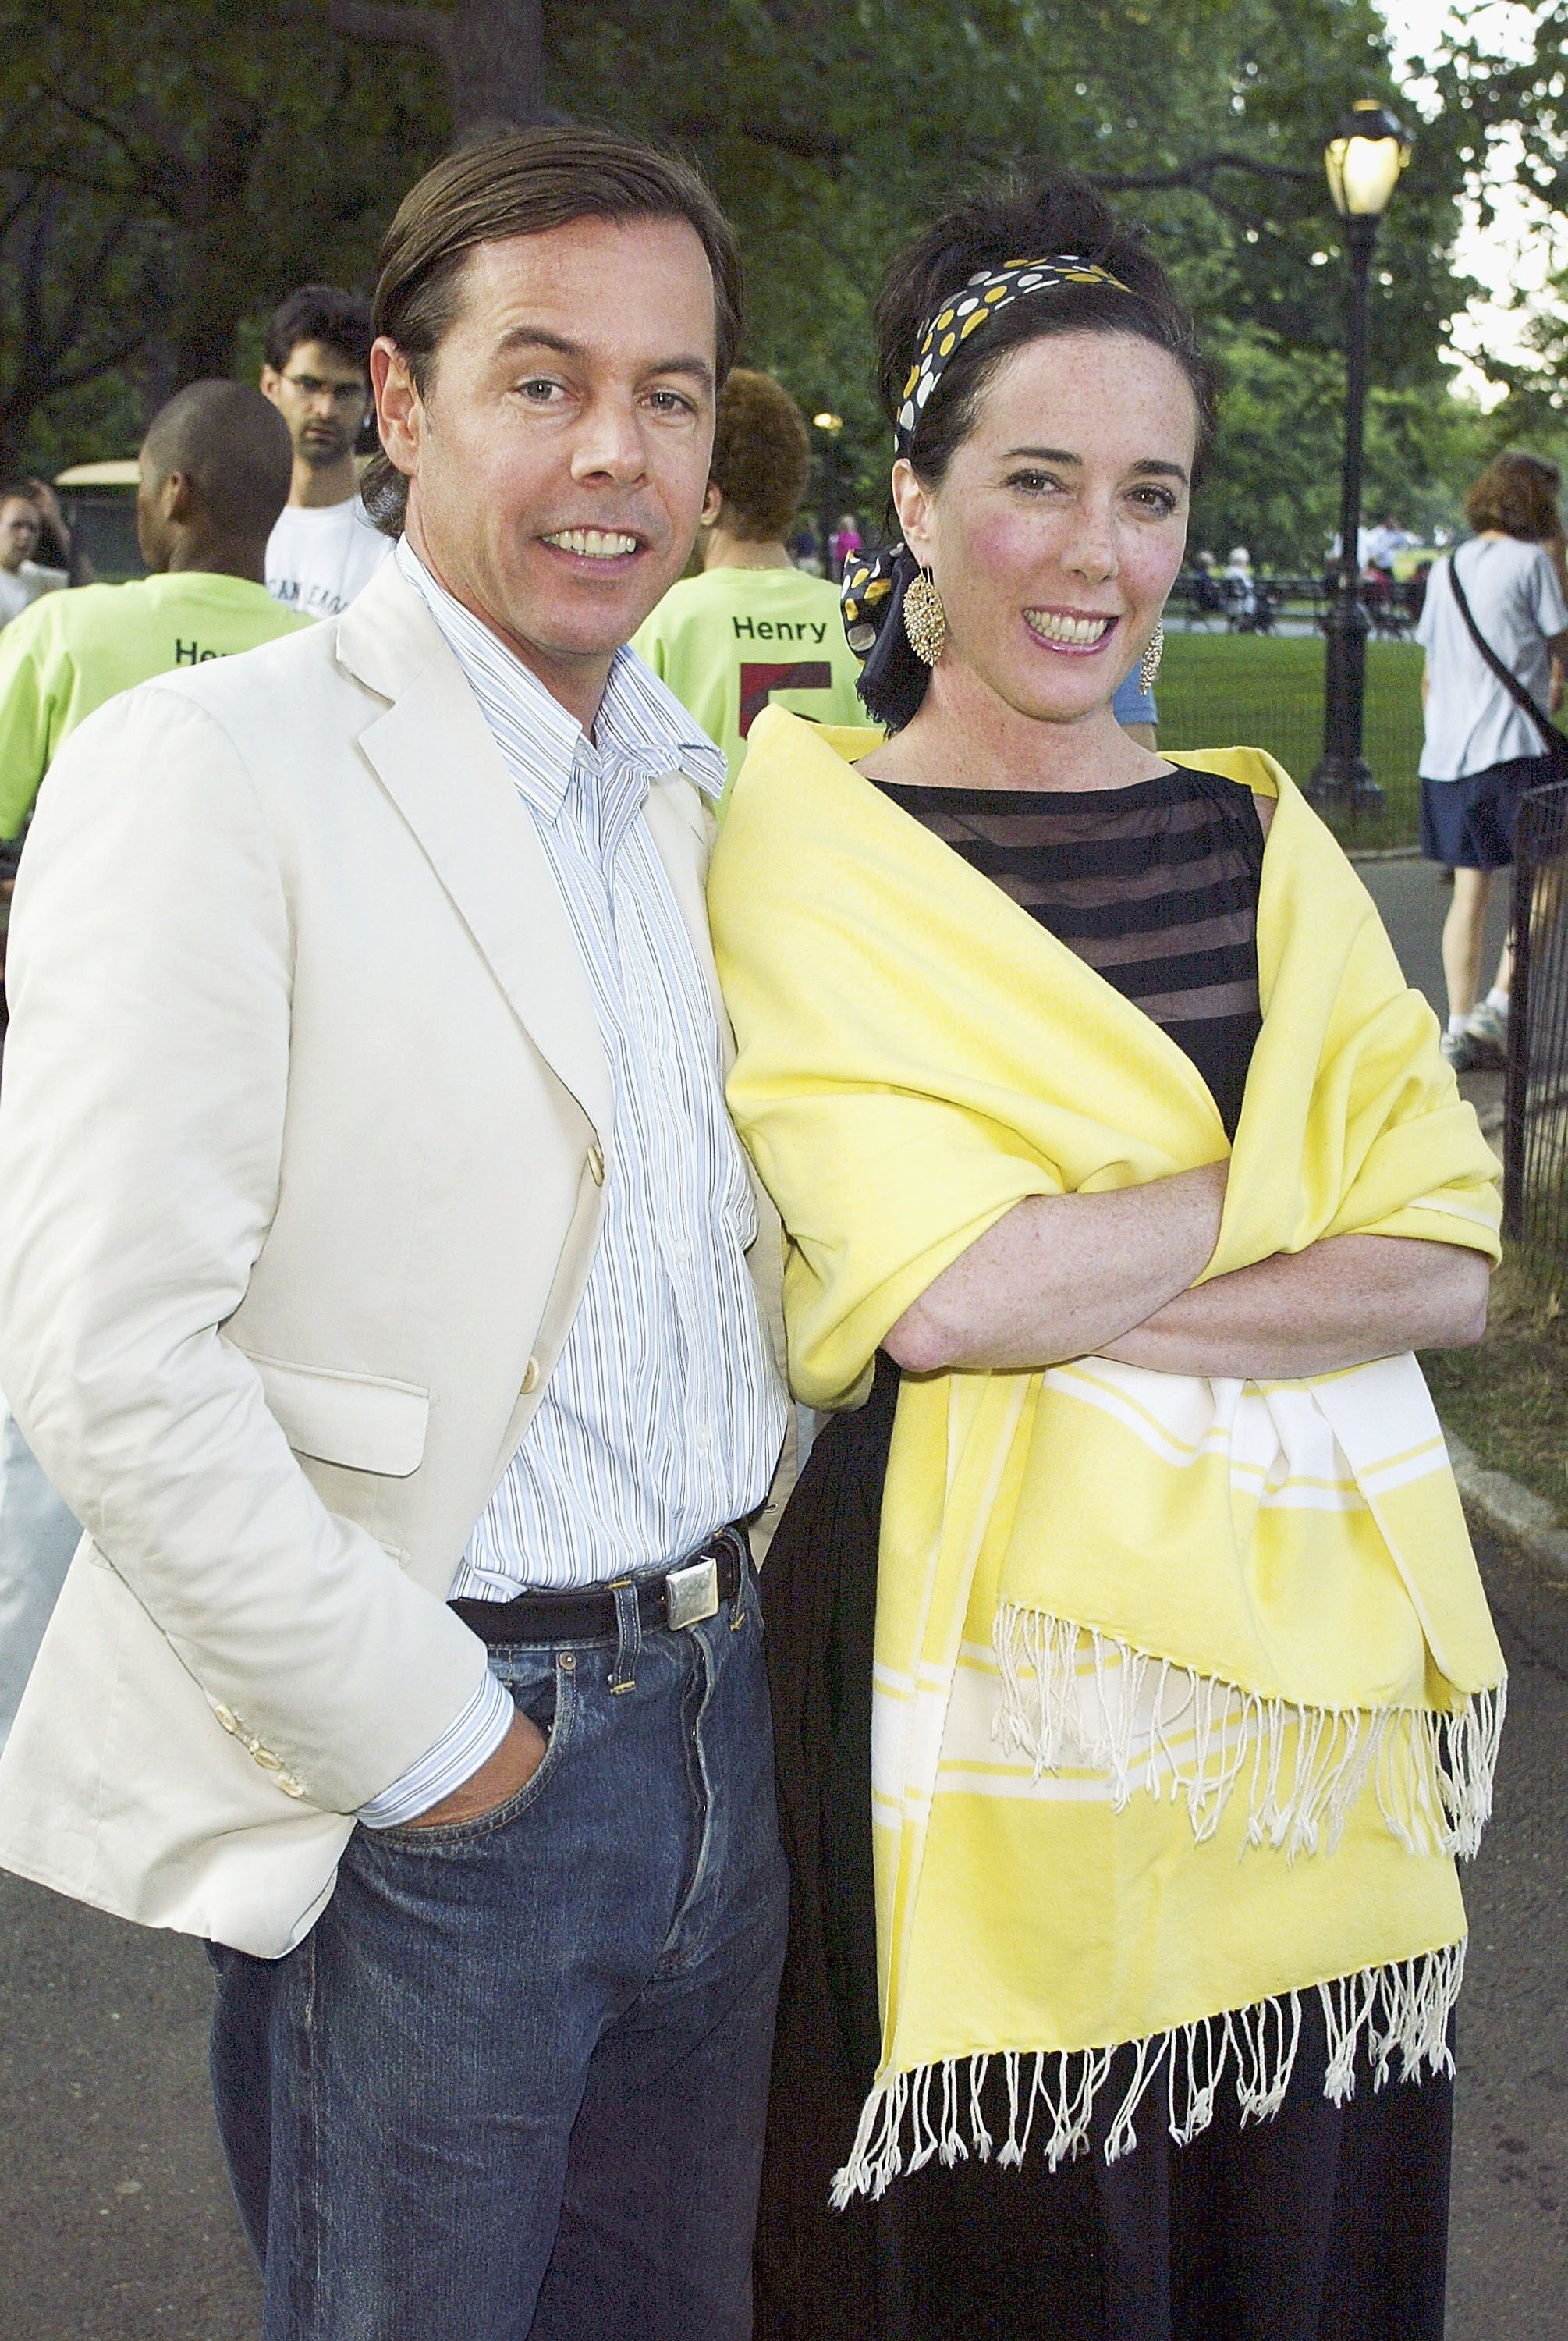 Photos of Kate Spade Through the Years - Pictures of Young Kate Spade to Now